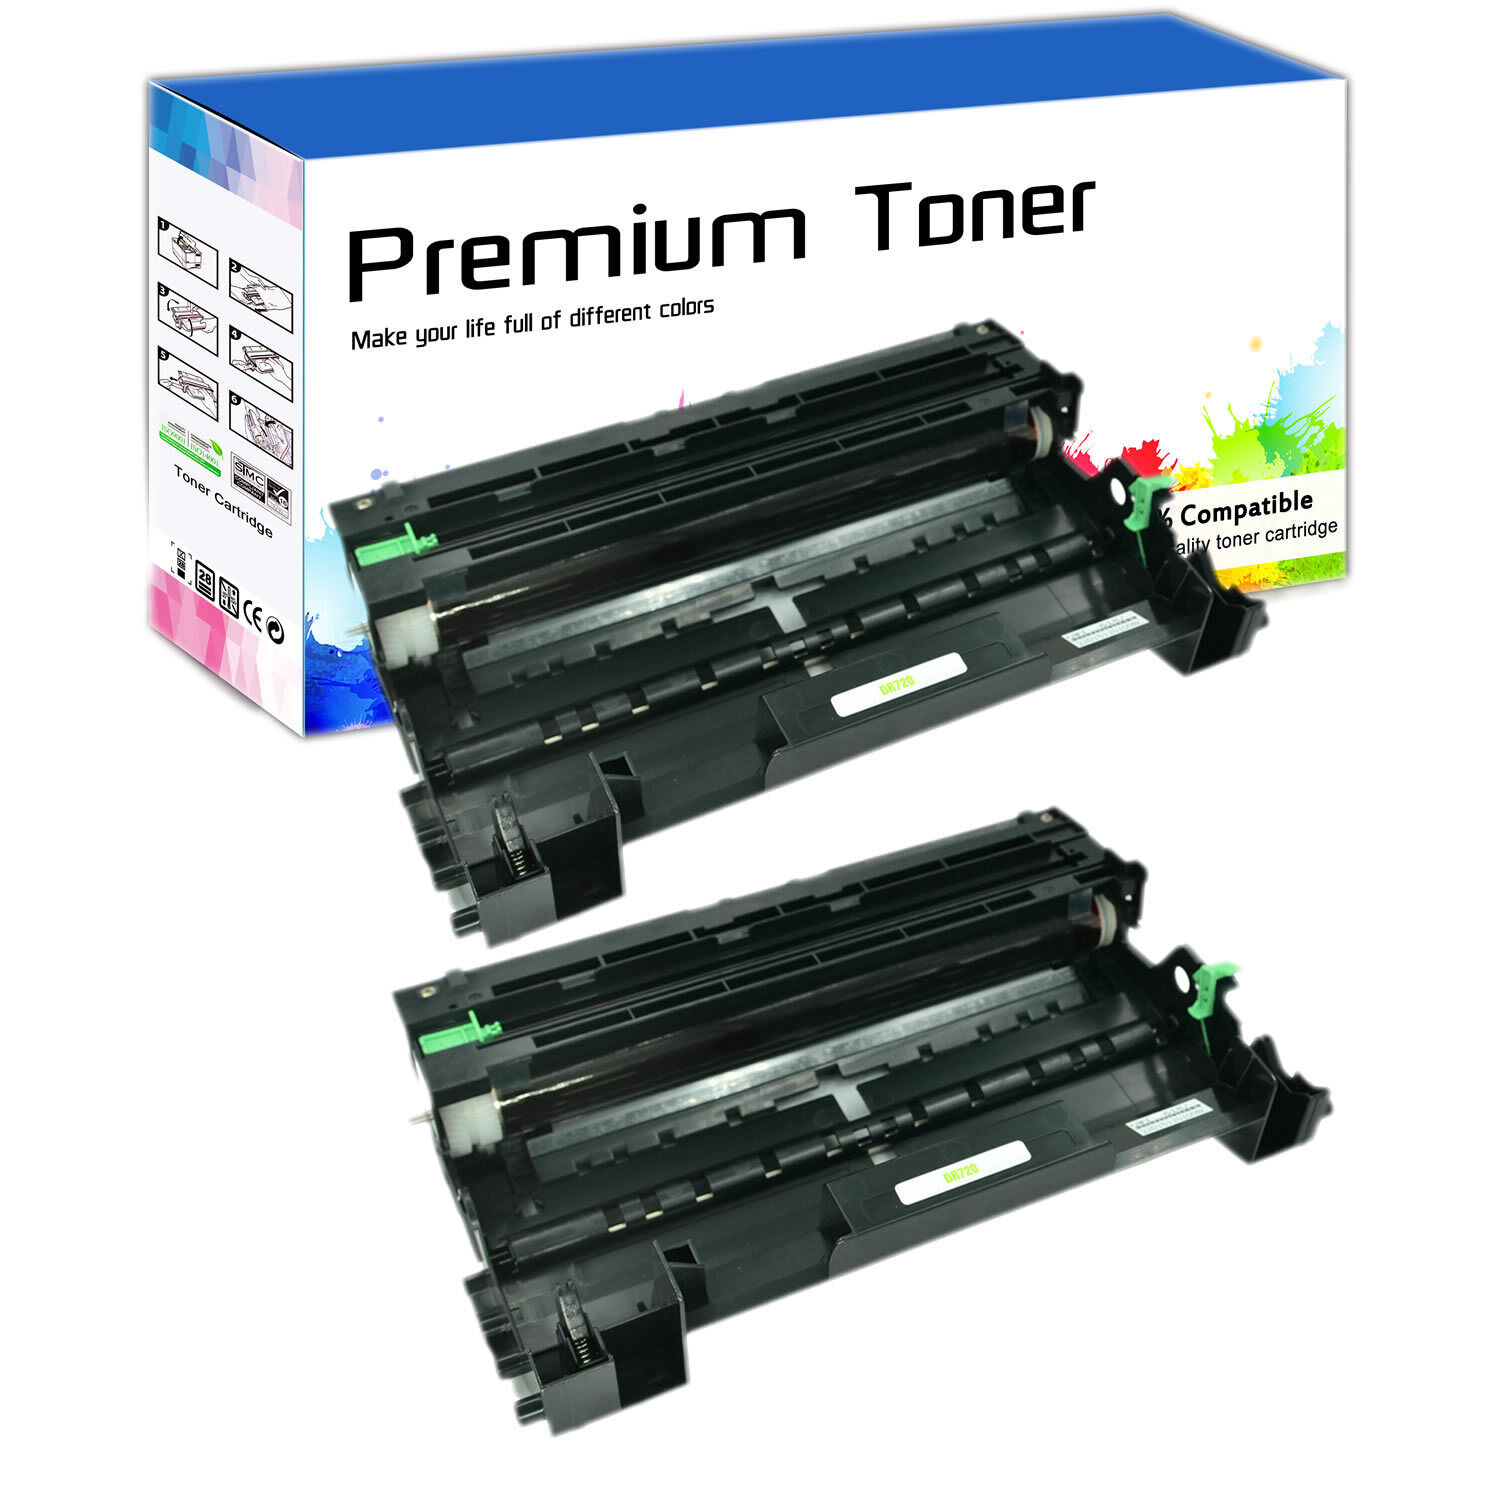 2 Pack - DR720 Drum Unit For Brother DR-720 MFC-8515DN MFC-8520DN MFC-8710DW